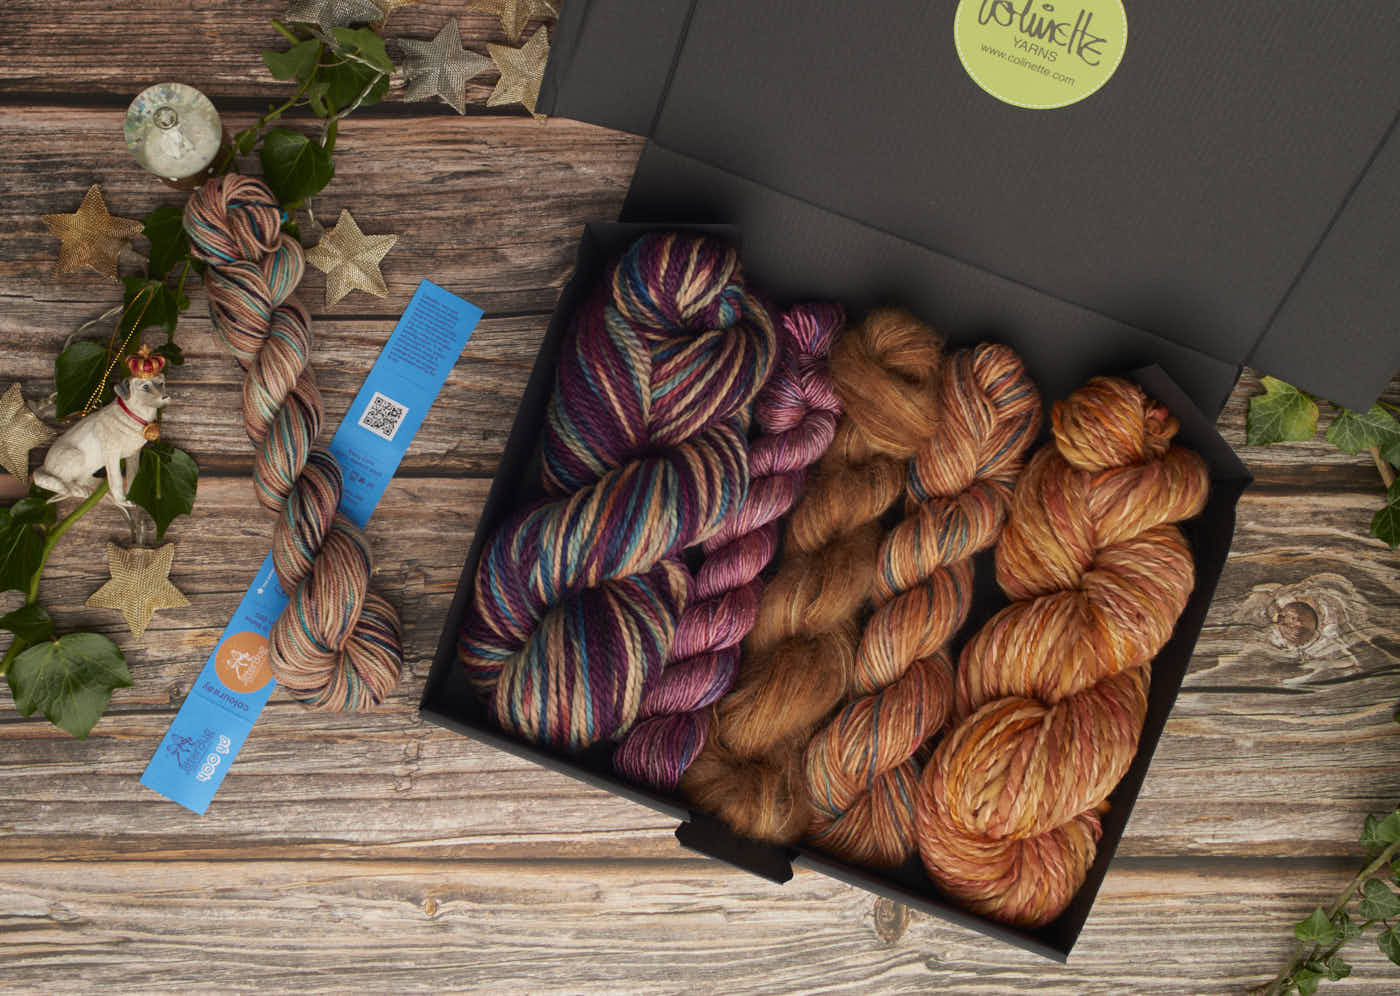 colinette yarns hand dyed yarn Christmas boxes shades Browns